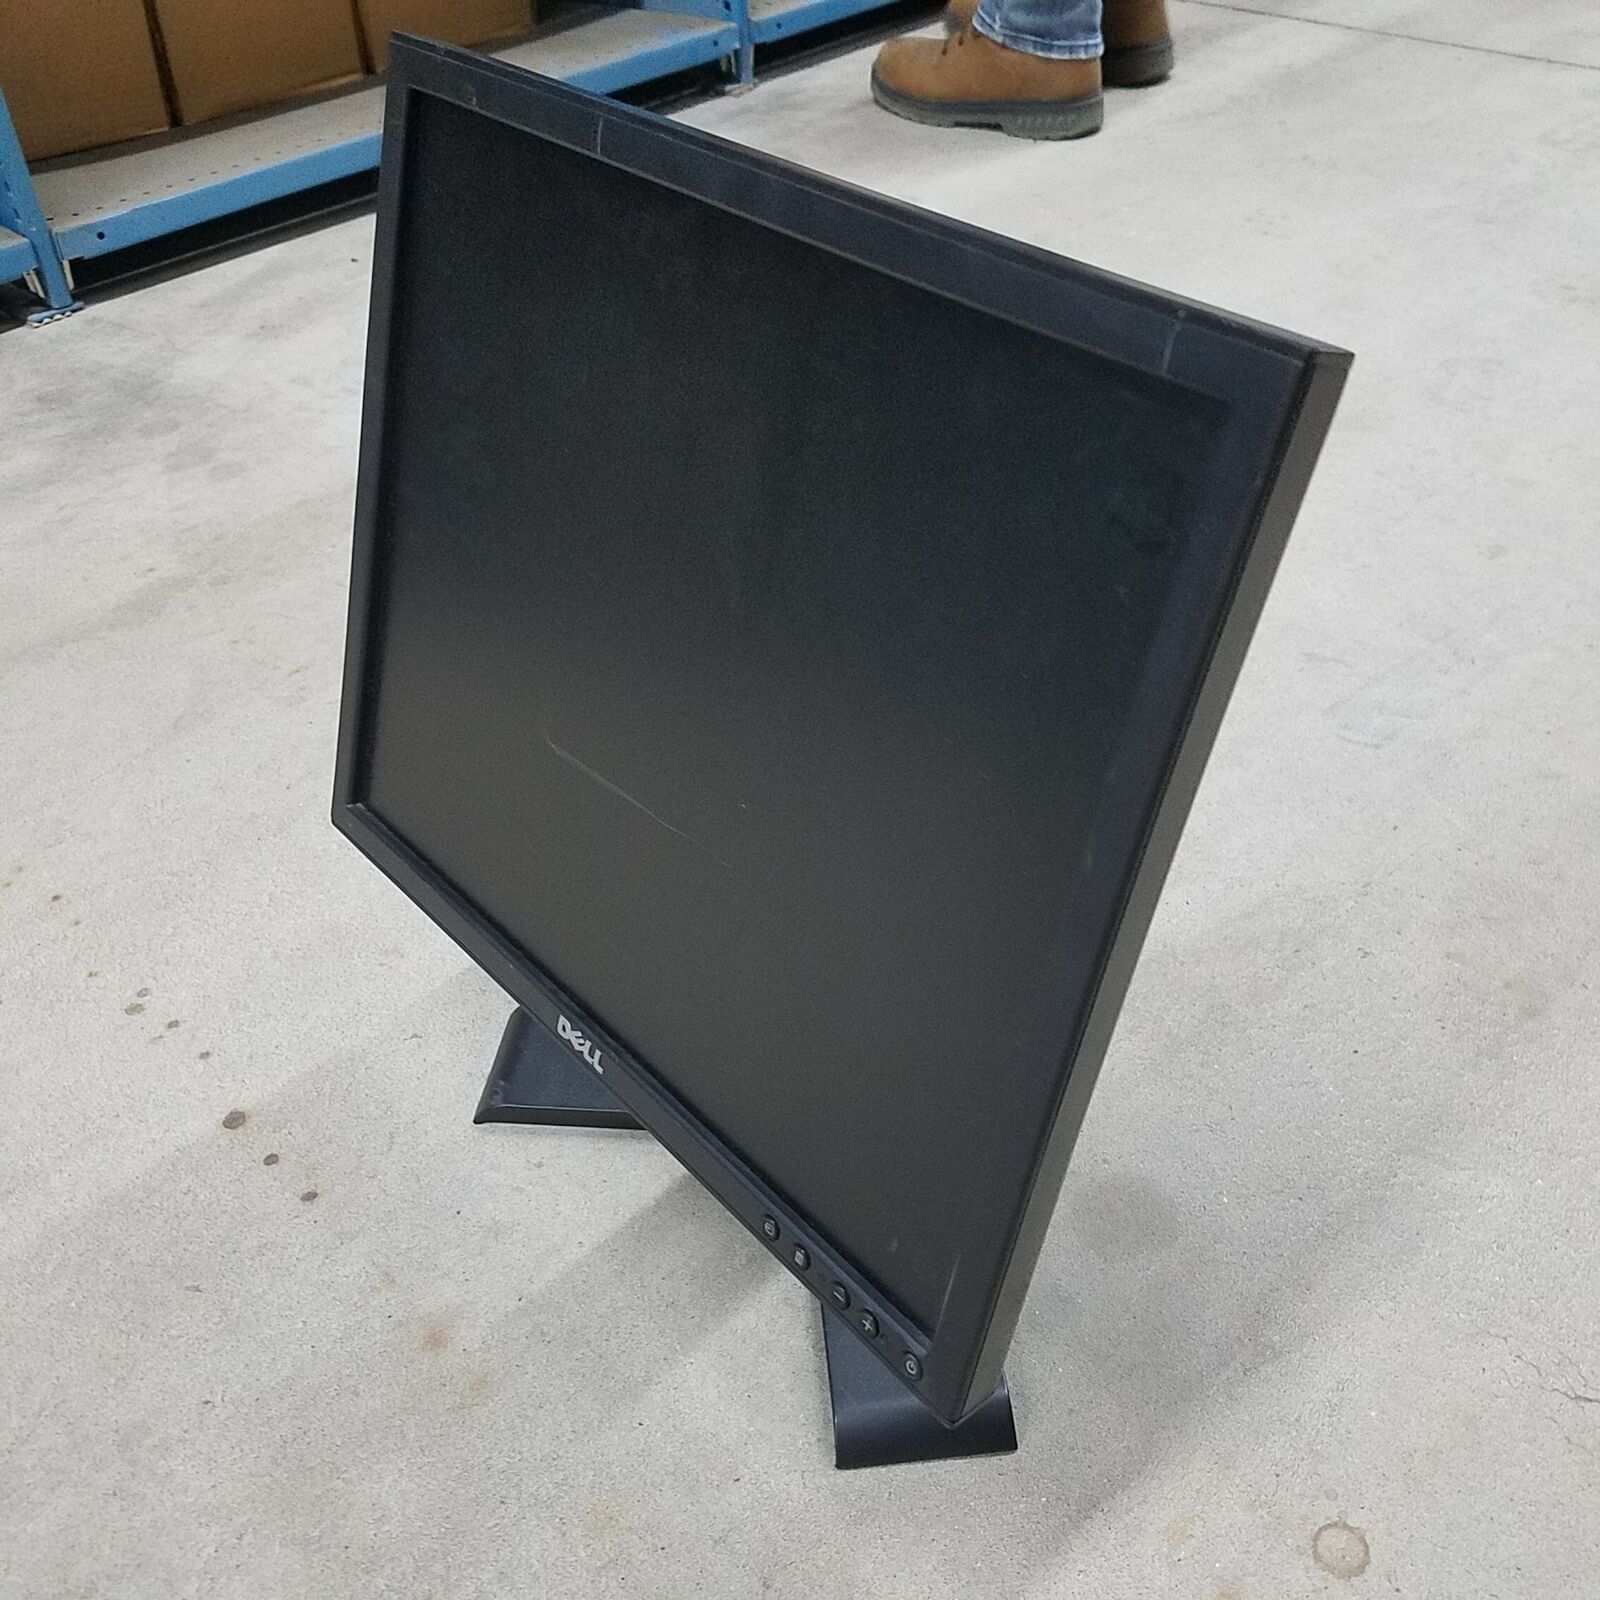 Dell P190St LCD Monitor, 19